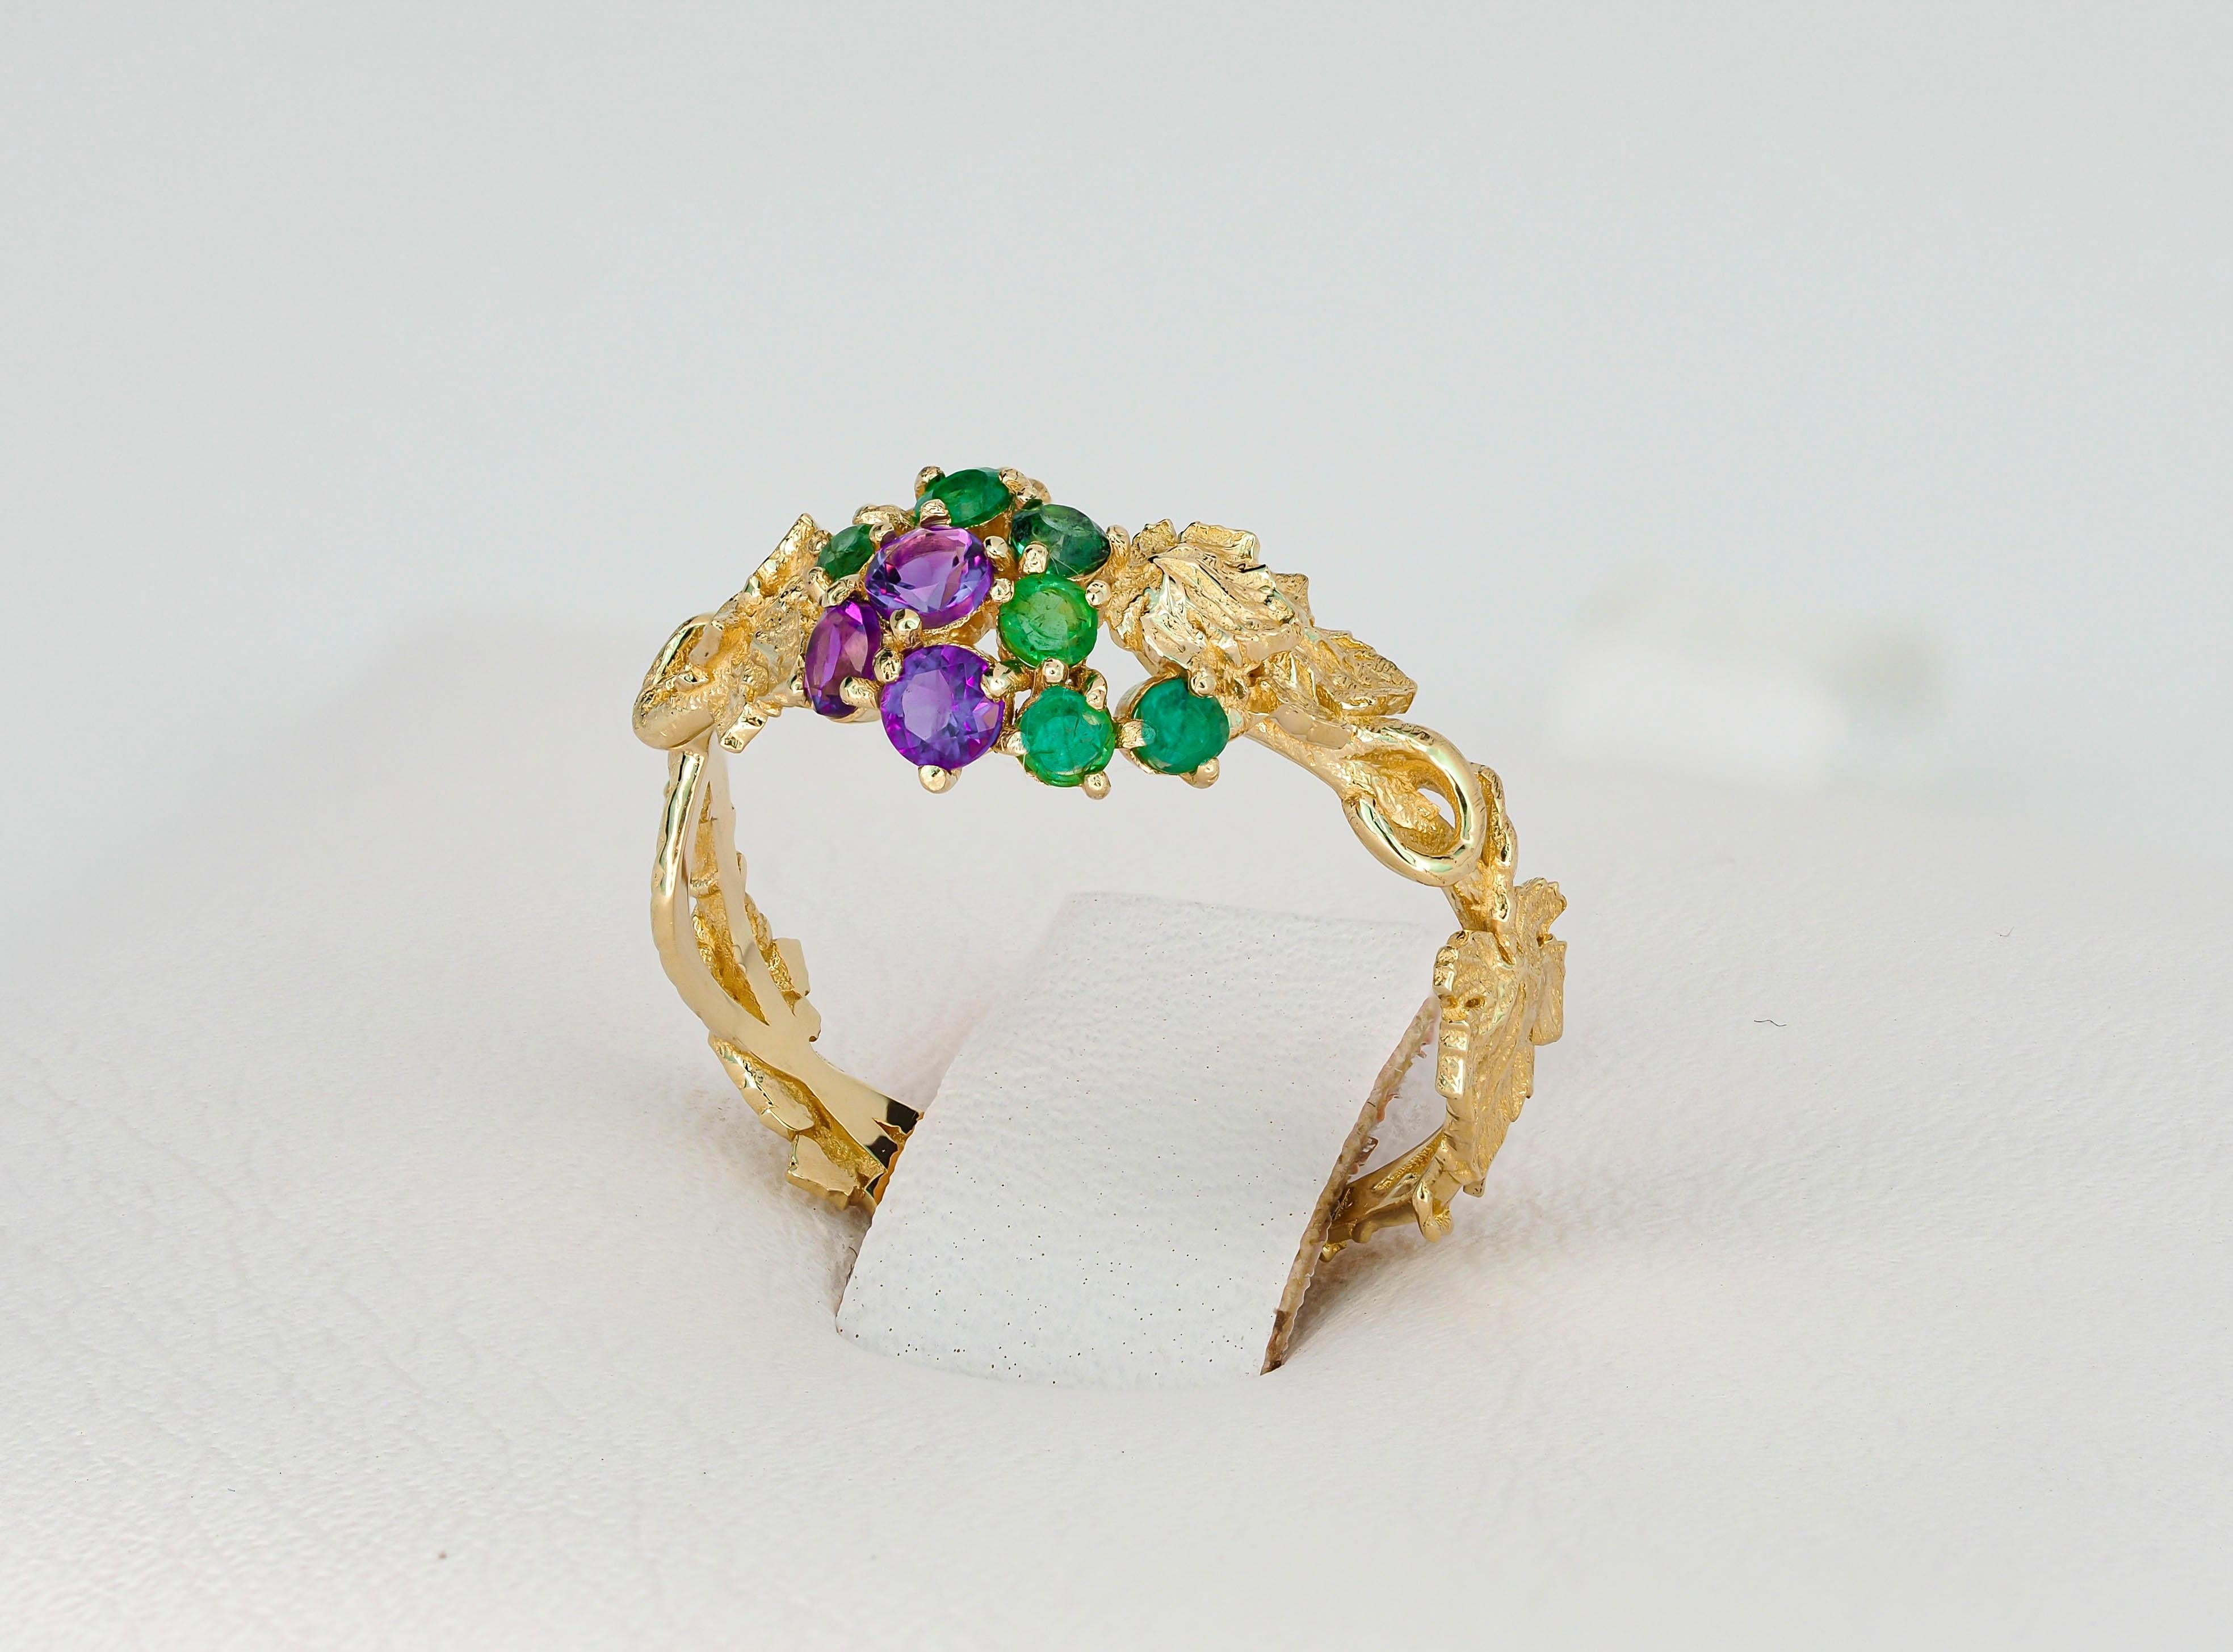 14 kt  gold ring with natural amethysts and emeralds. Grape tree design ring. February birthstone. May birthstone.
Weight approx. 1.96 g.
Metal: 14kt solid gold 

Gemstones
1. Natural amethysts:
Total weight: 0.24 ct (0.08 ct x 3 pieces), round